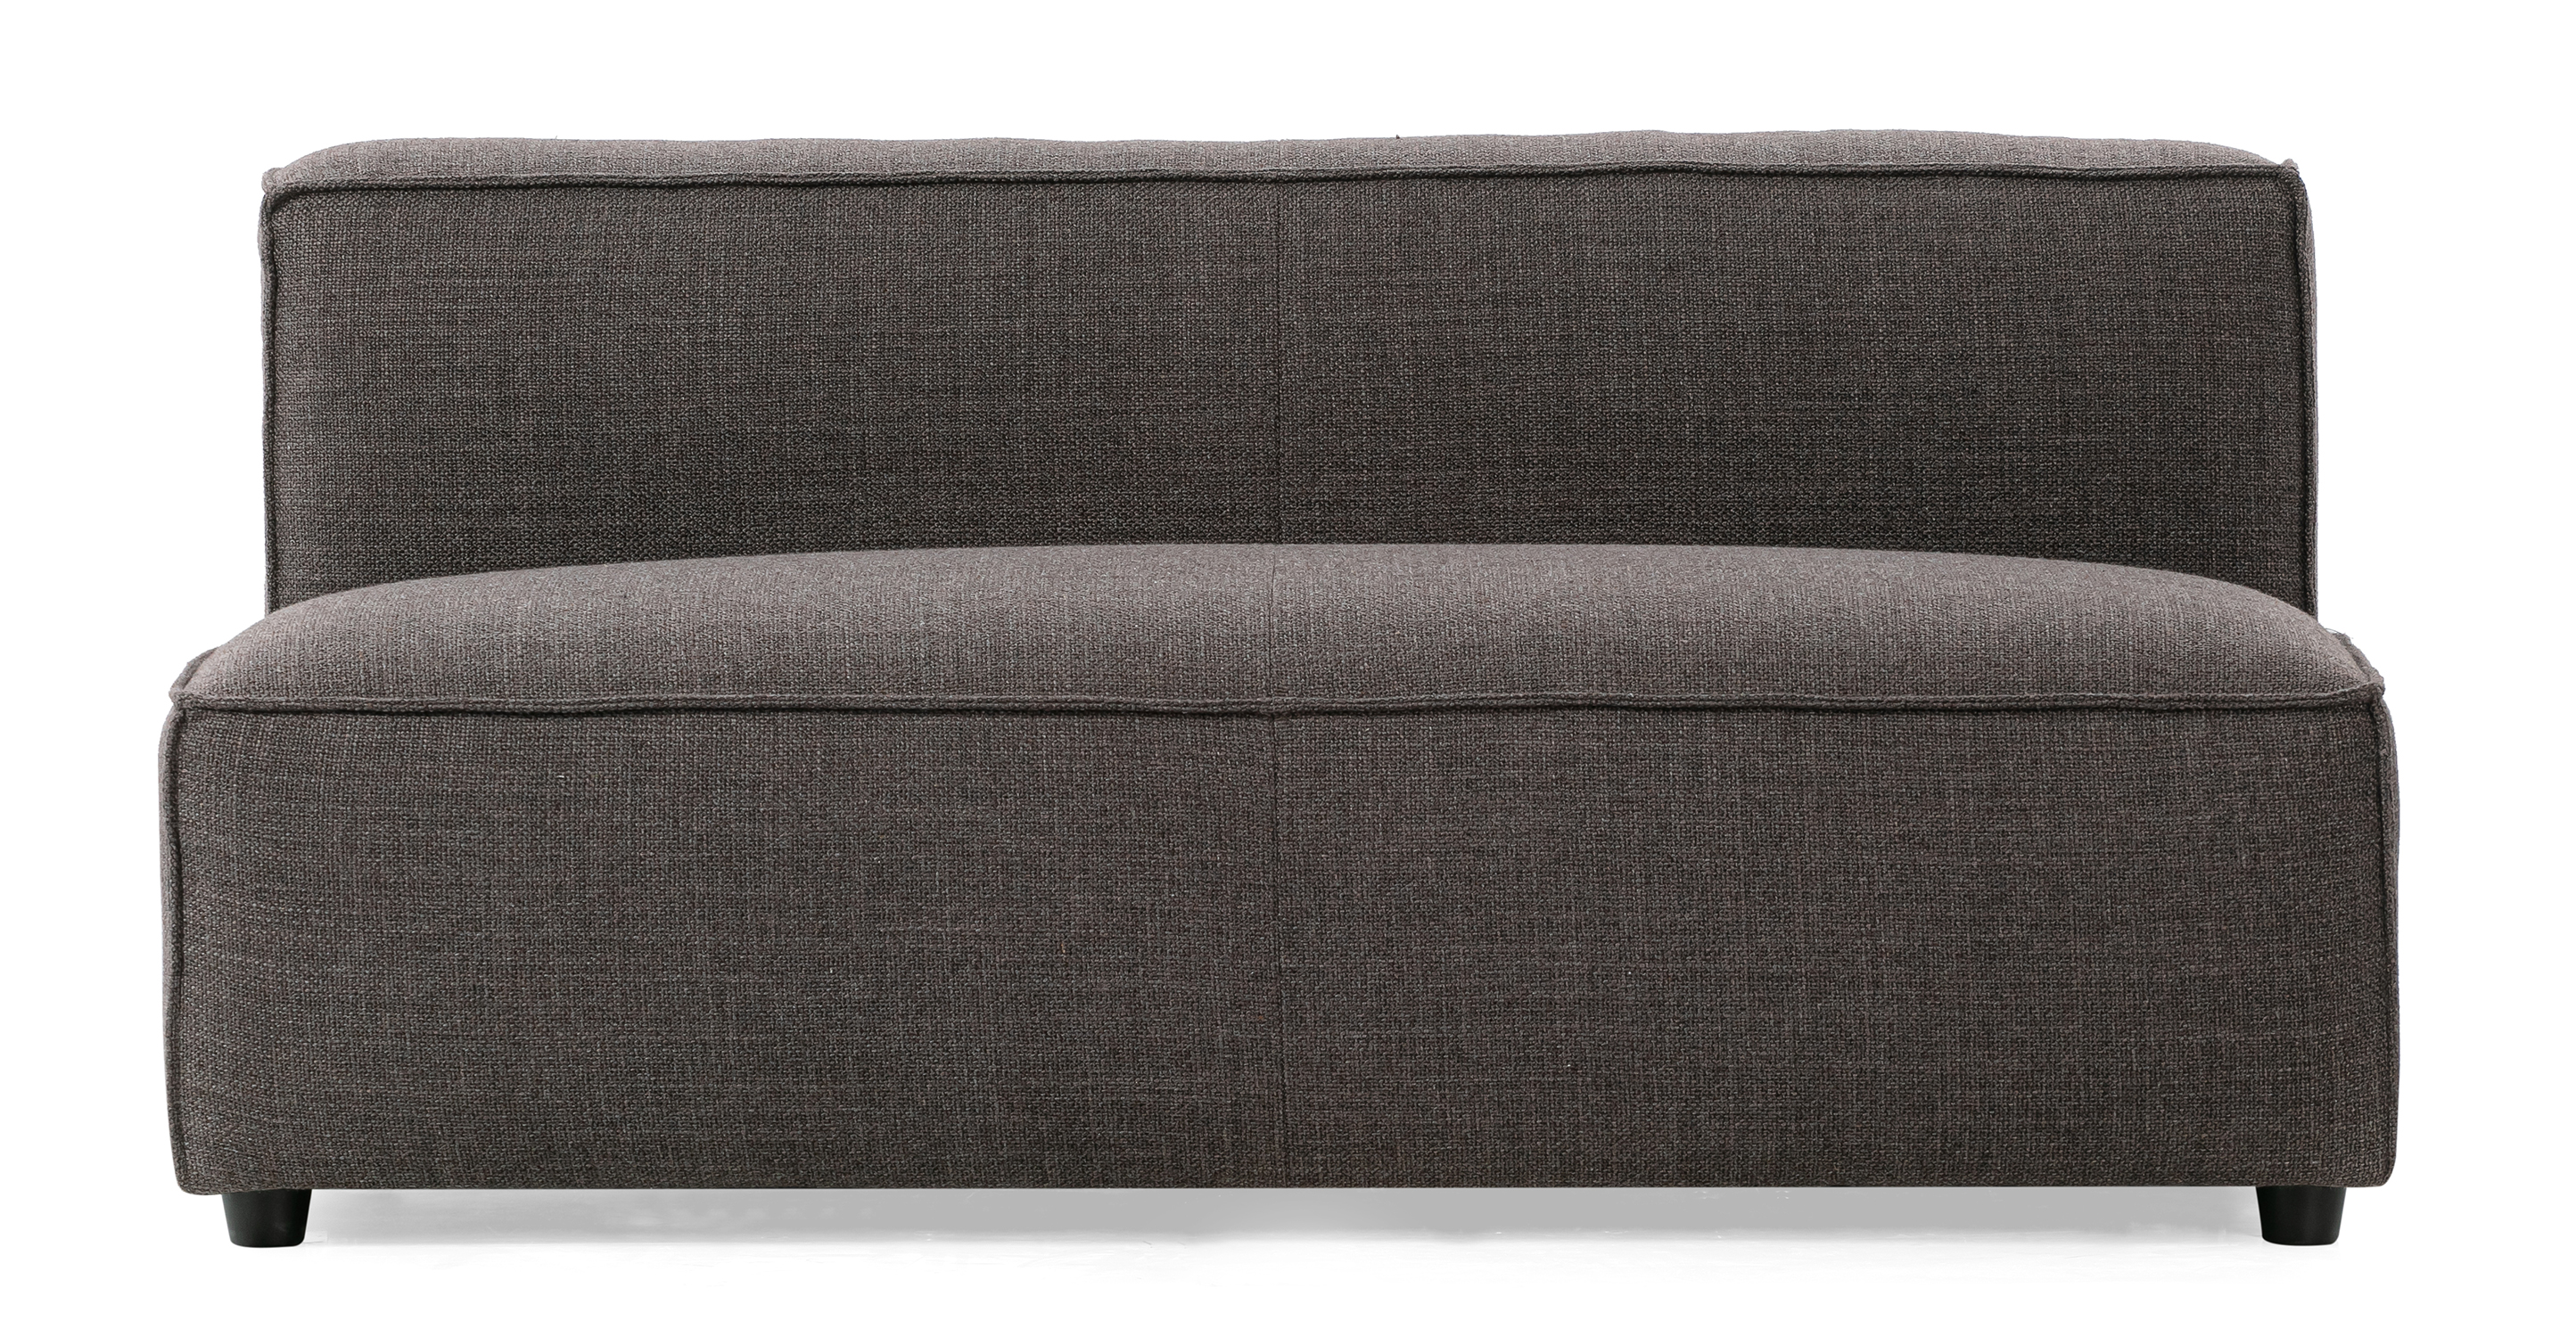 Soho Dior armless love seat is a low profile love seat mounted to short black legs. The base of the love seat is a large once piece cushion. Mounted to the back of the love seat is a rectangle one piece back. The cushions having piping along the edge and a center stitching seam. This item can stand alone or be a part of the modular series were more pieces can be added.